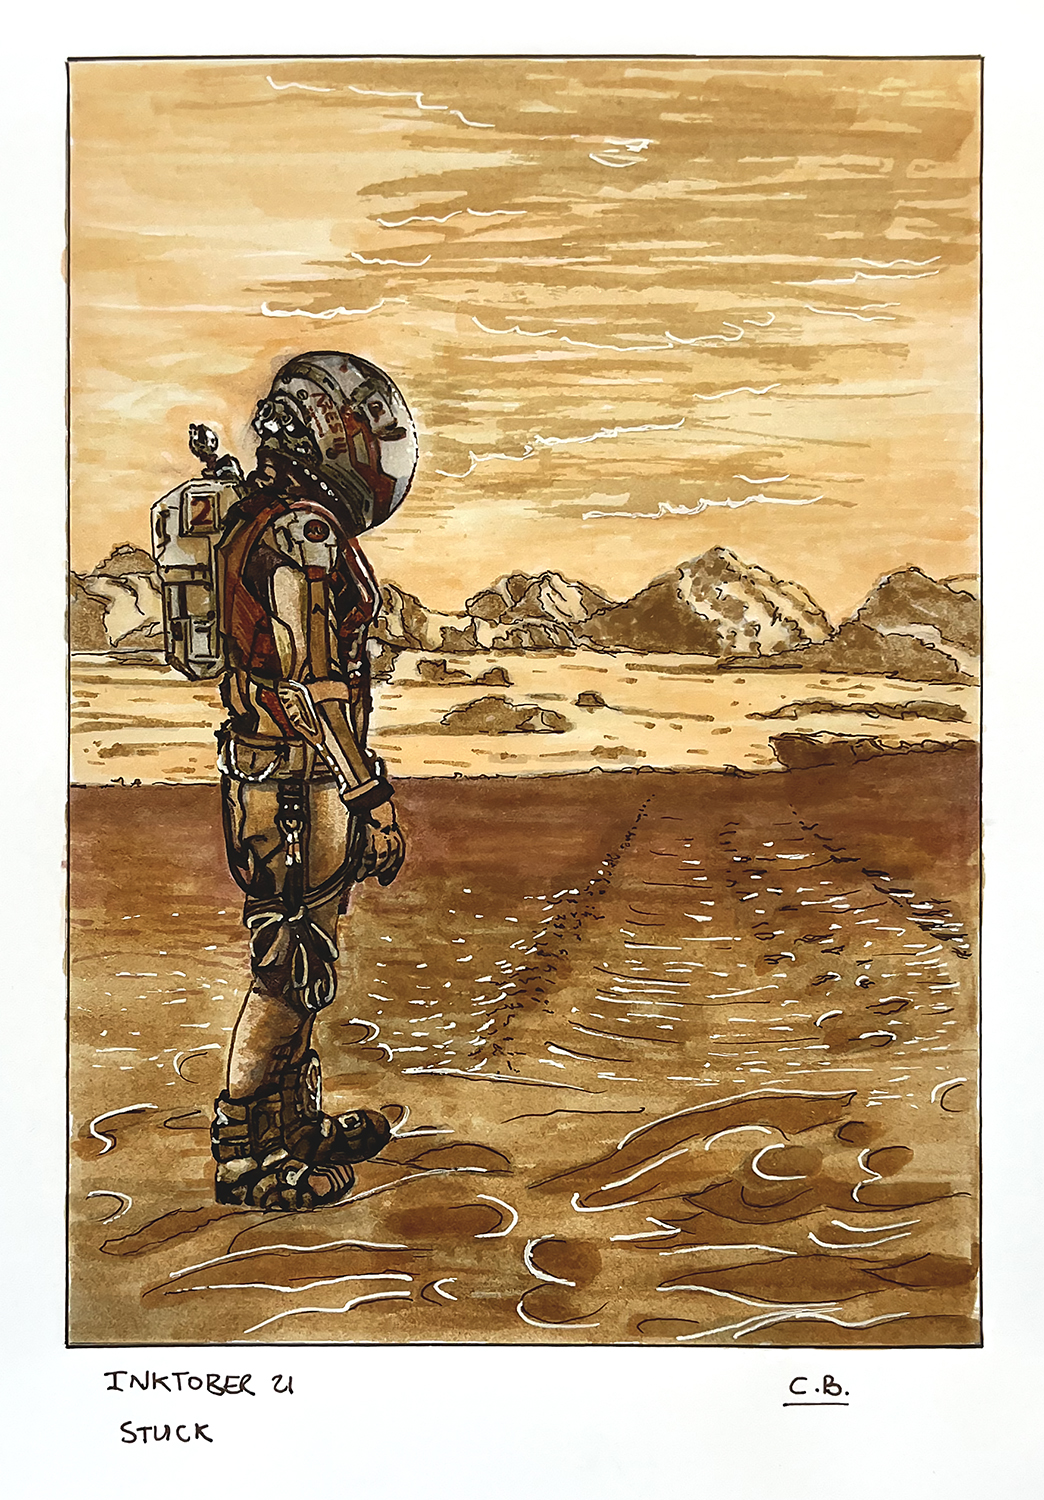 Drawing of the Martian